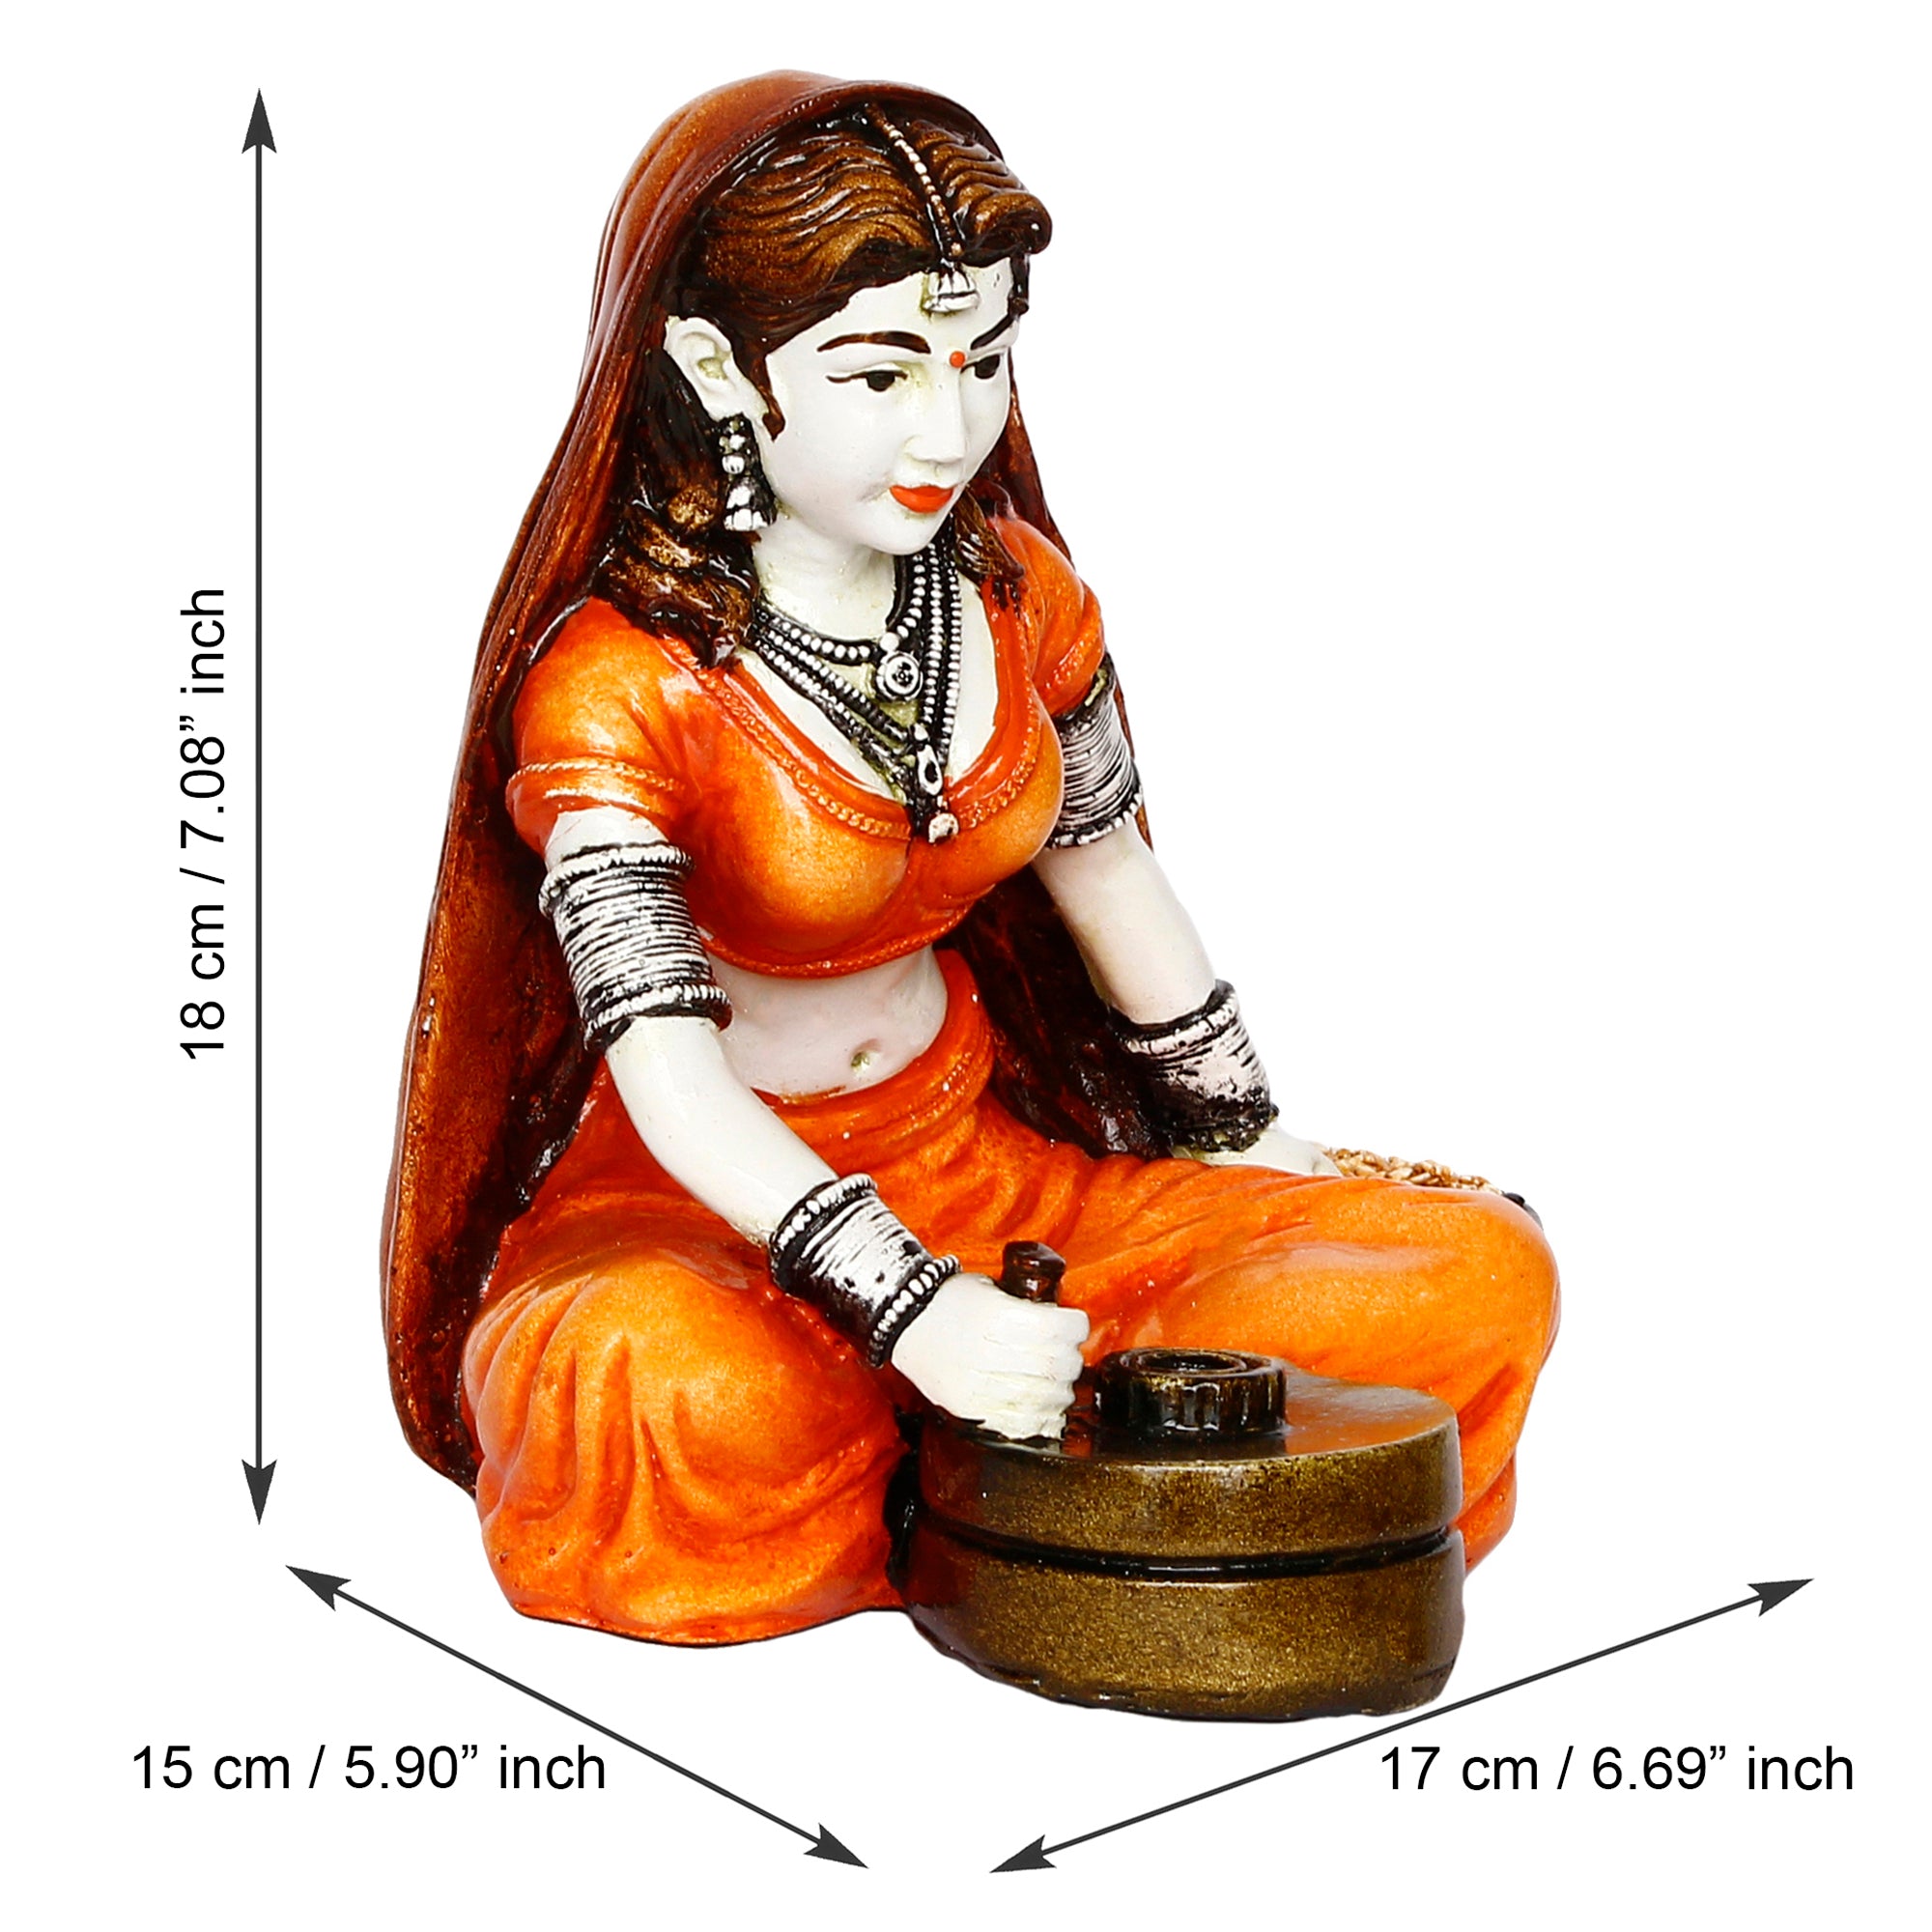 Polyresin Rajasthani Women Statue Using Traditional Flour Mill Handcrafted Human Figurine Decorative Showpiece 3